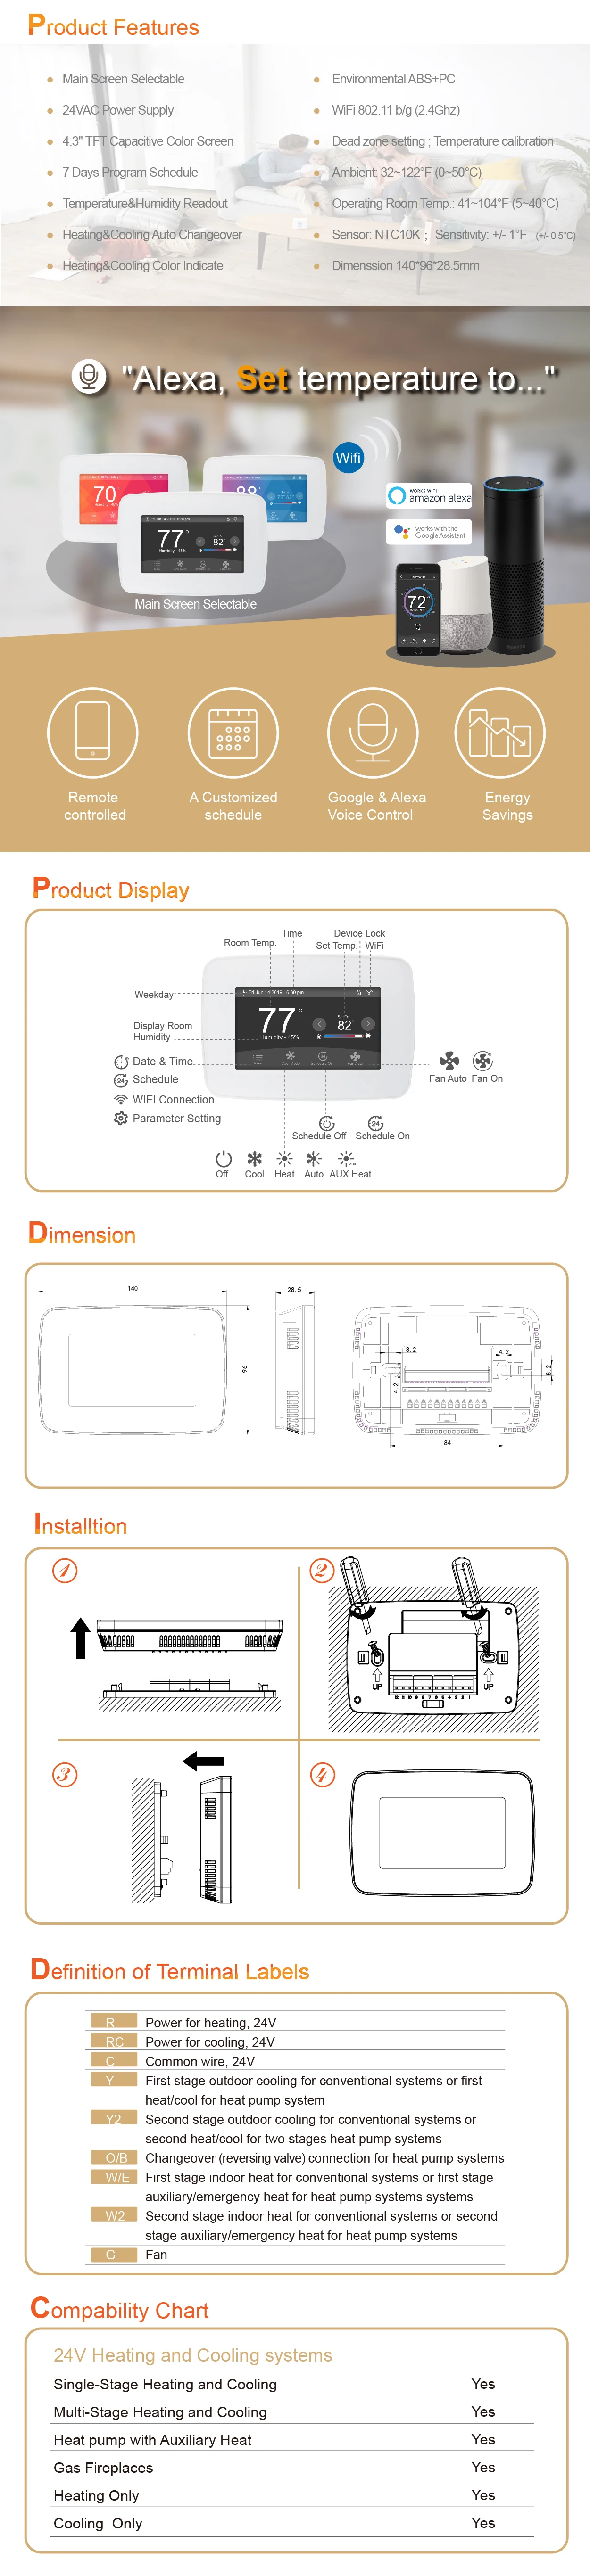 2020 Top Rated 2 Stage Heat Pump Thermostat Wifi for Smart Home Heating Cooling Ventilating System